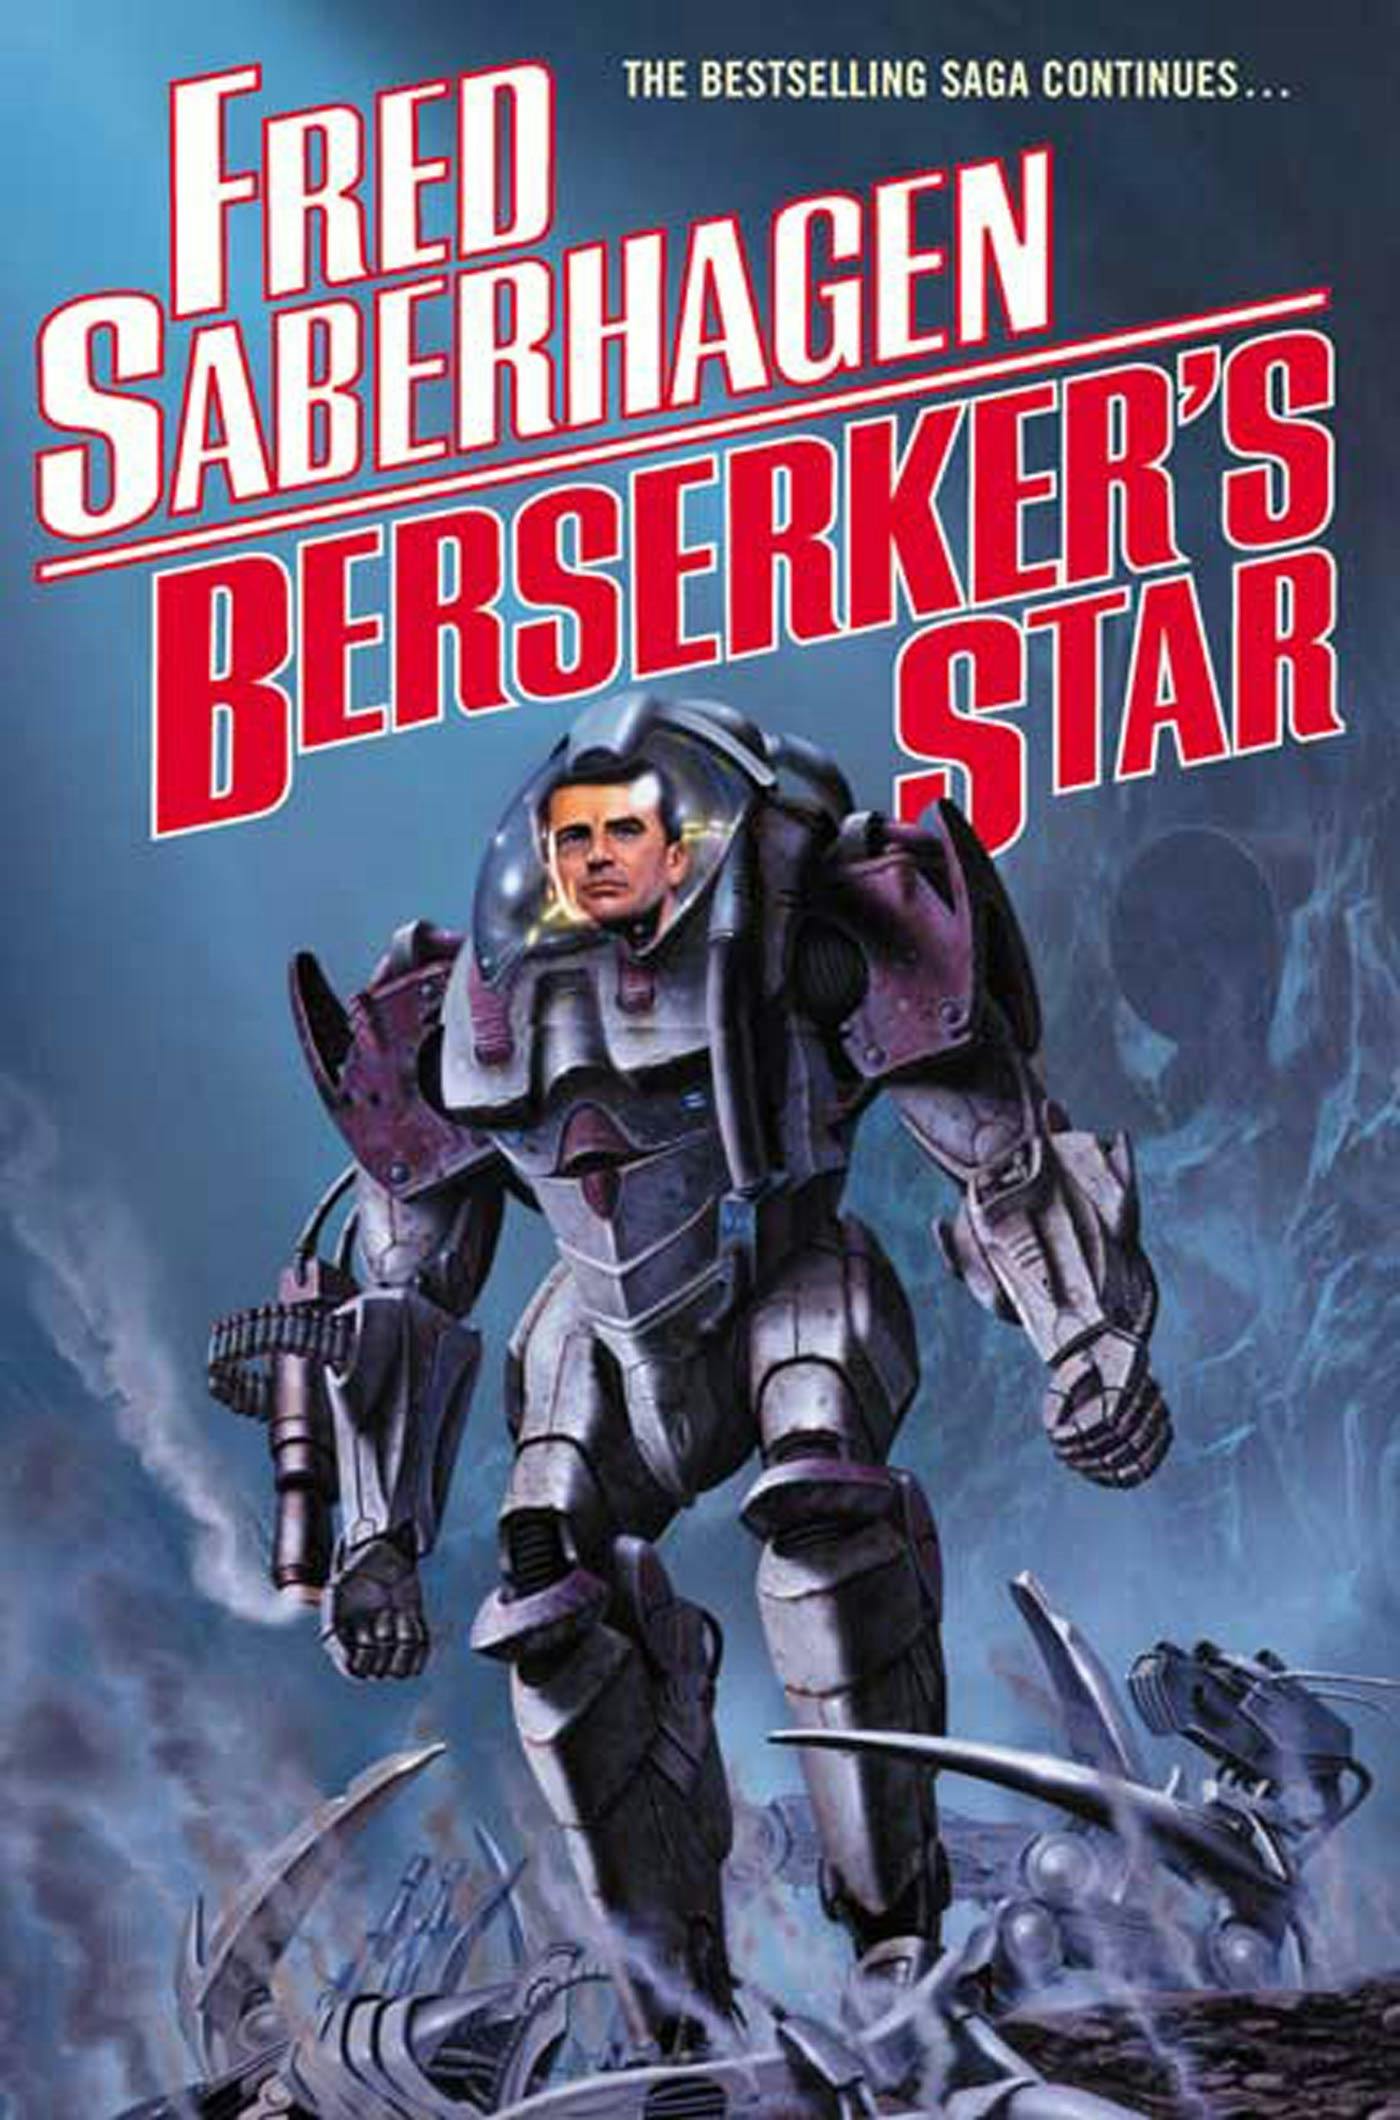 Cover for the book titled as: Berserker's Star